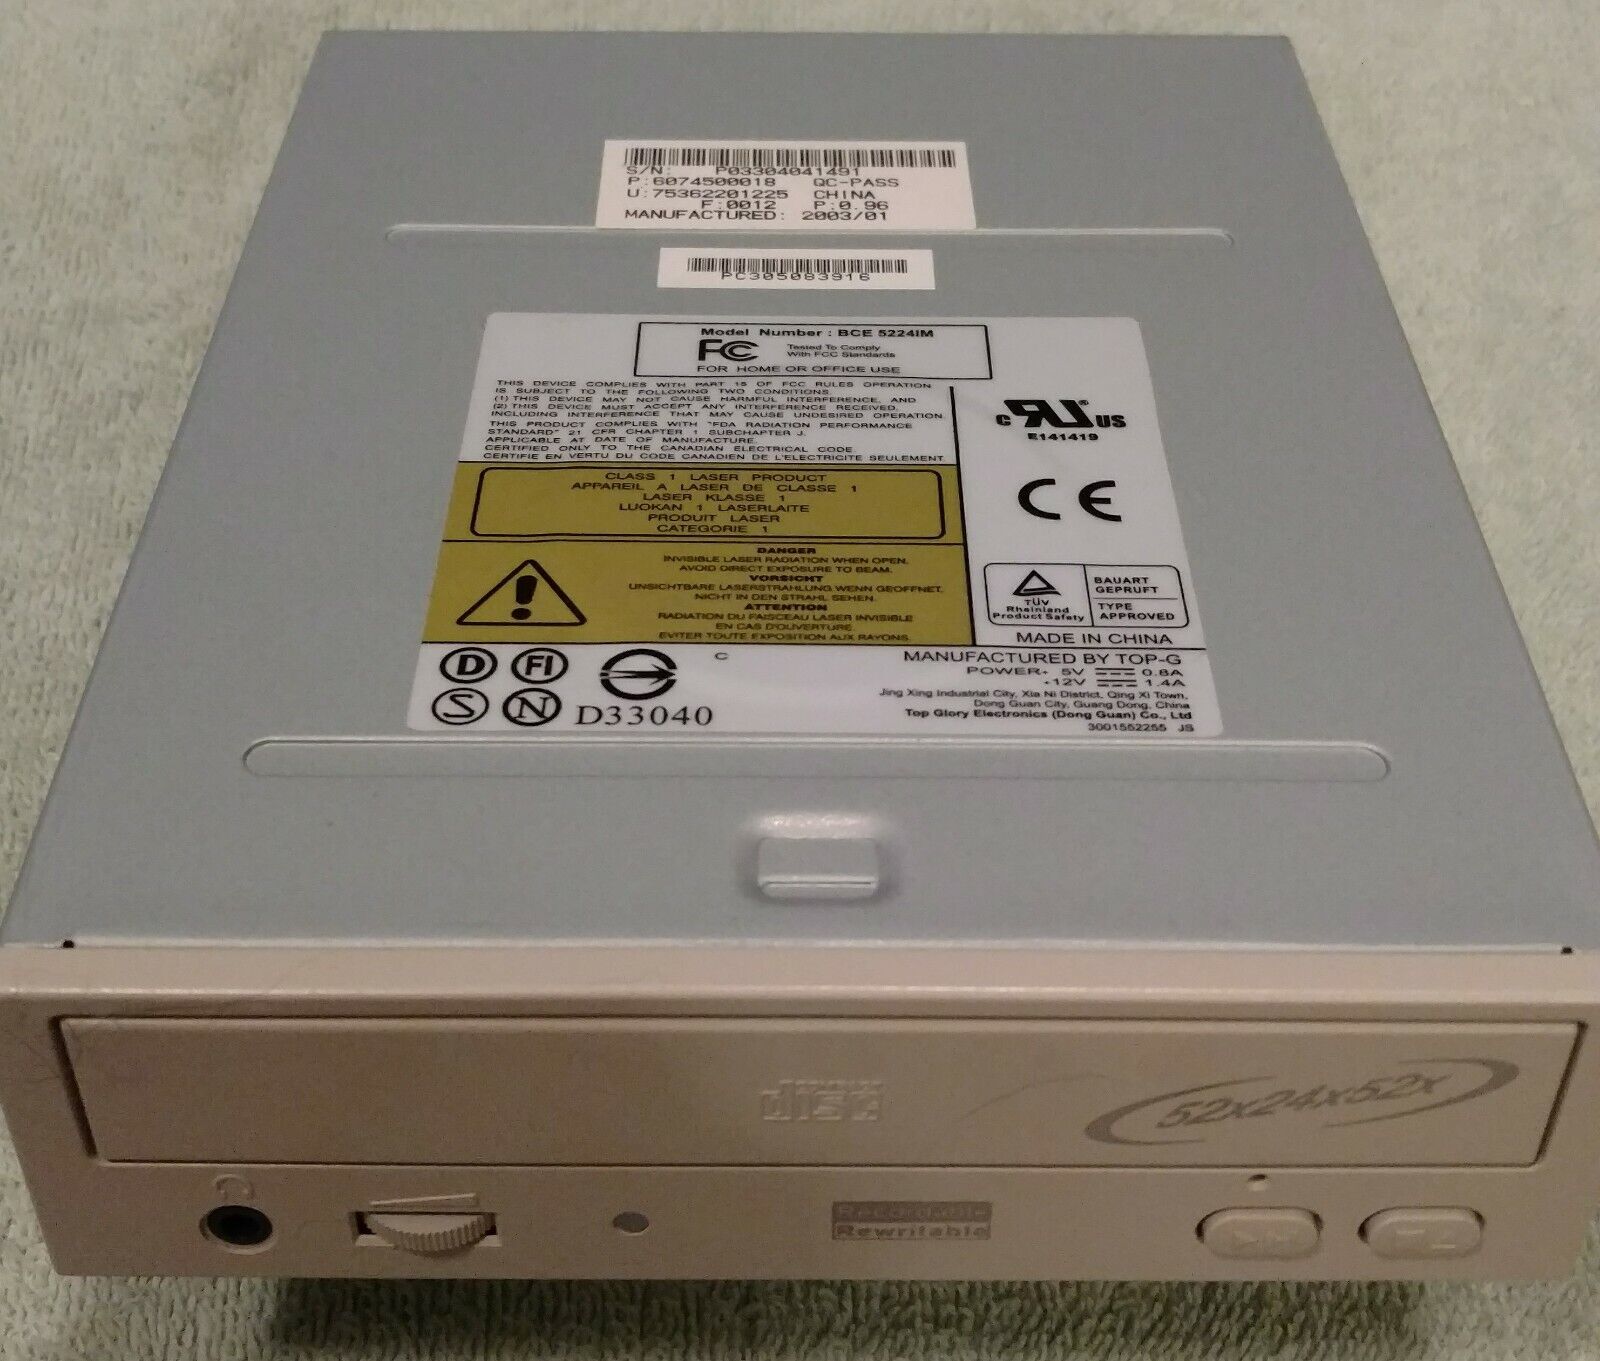 TOP-G BCE 5224IM CD recordable, rewritable IDE drive, 52x24x52x   6074500018